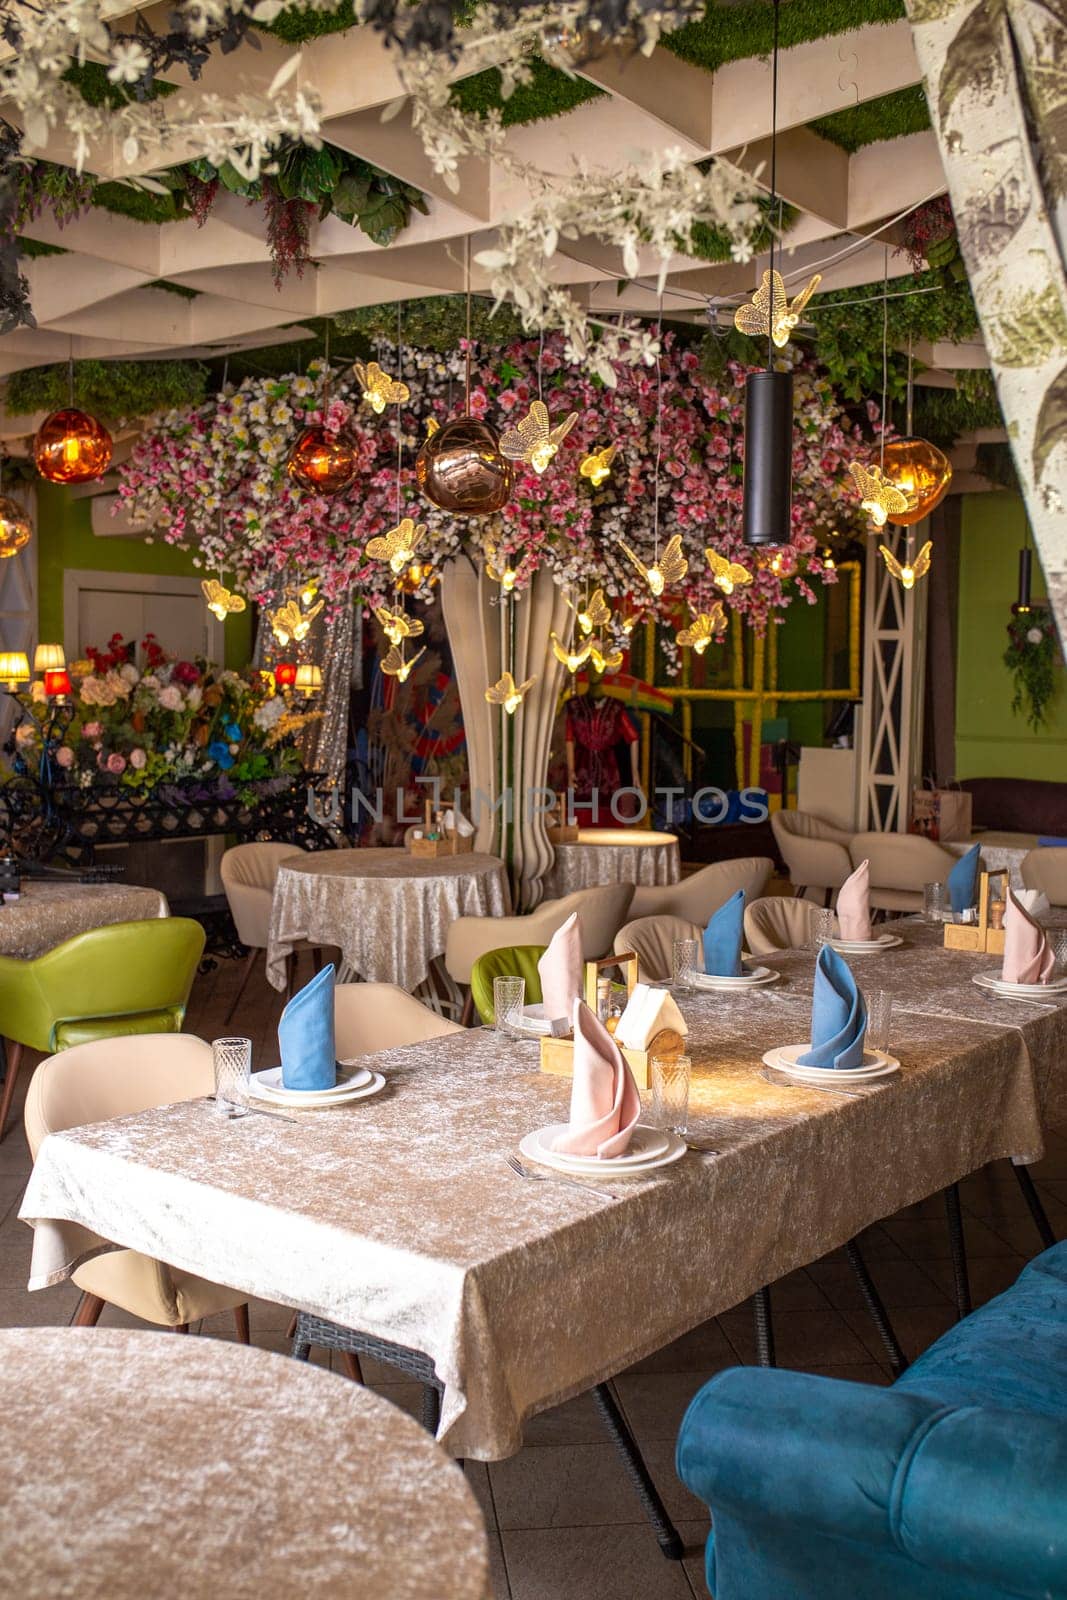 The image shows a beautifully decorated restaurant interior with a floral-adorned ceiling and elegant table settings.